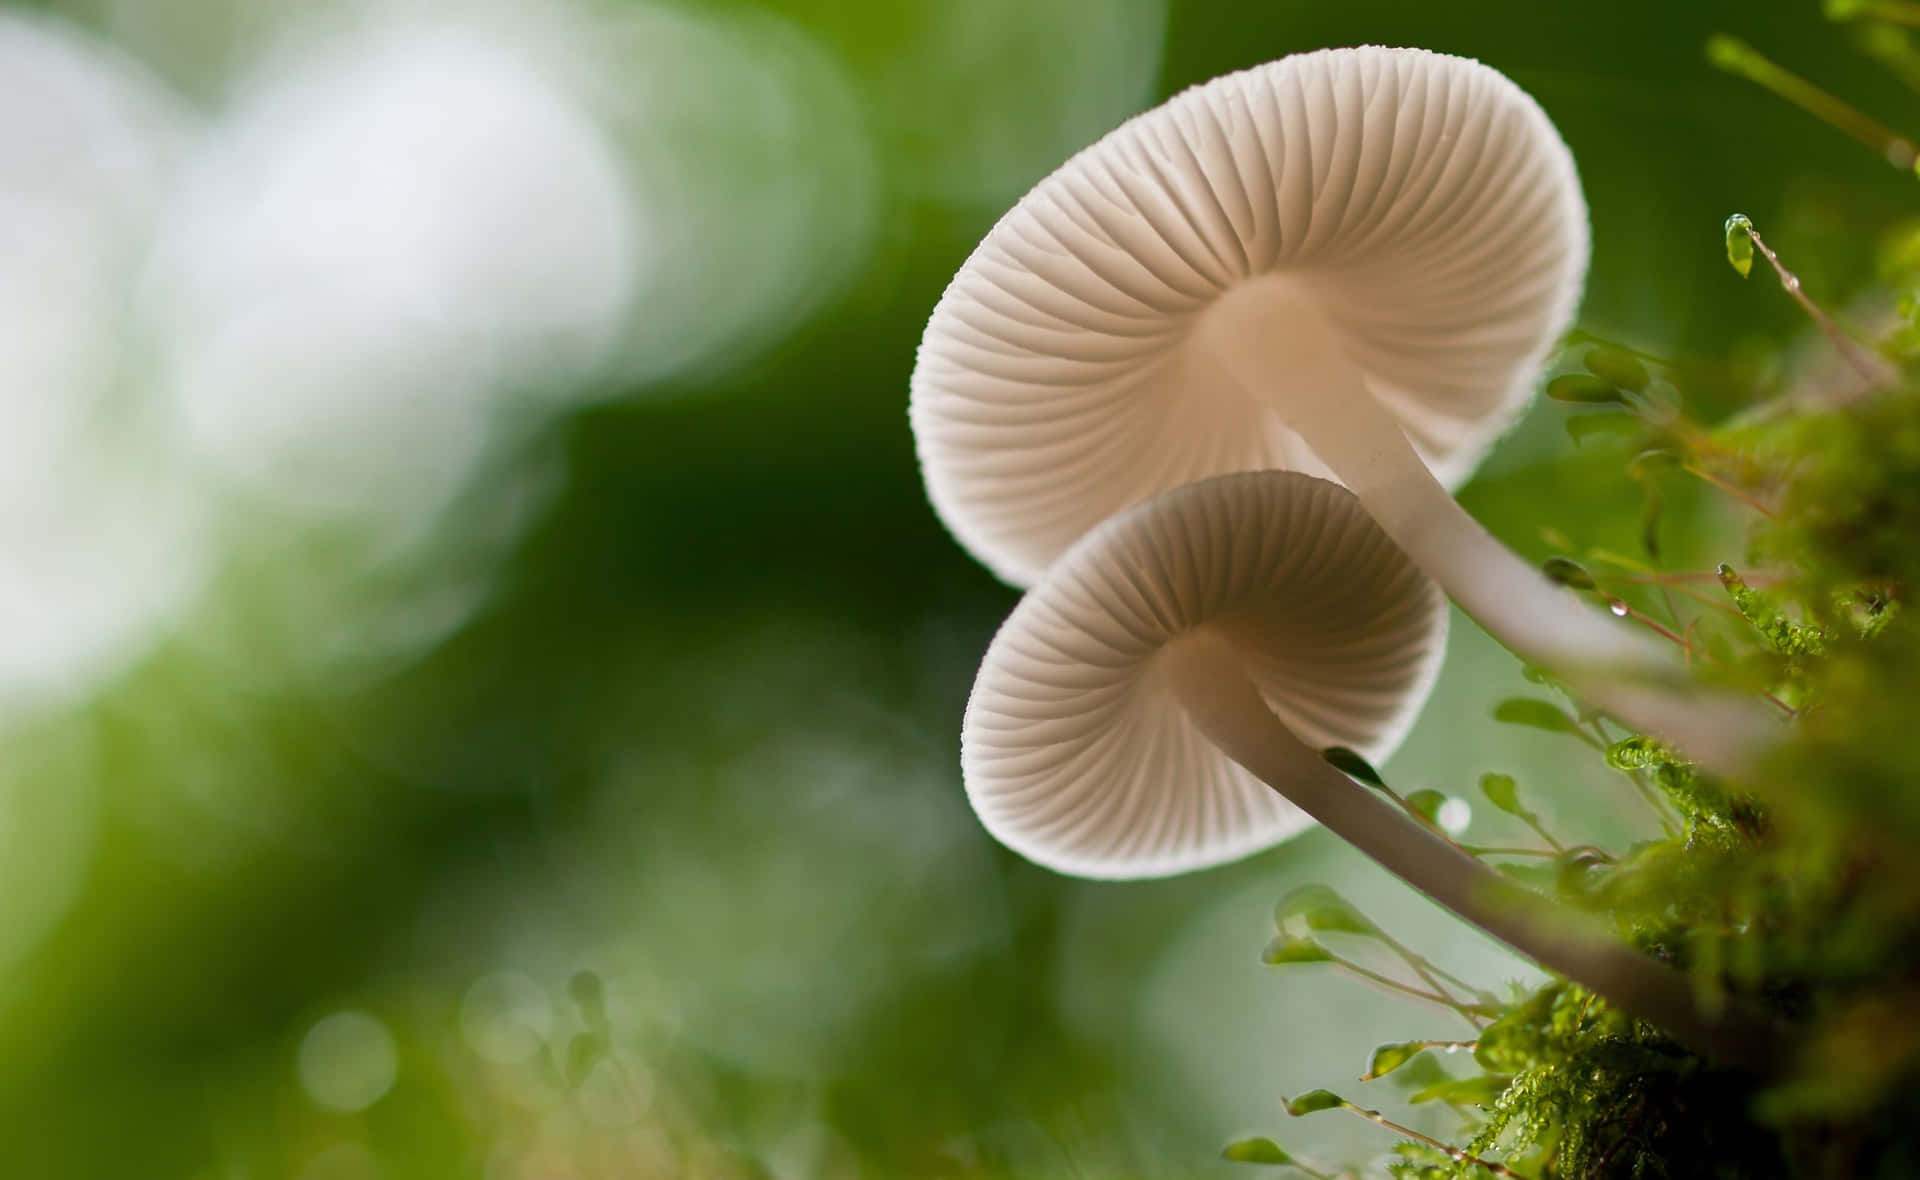 Get lost in a whimsical forest with delicious mushrooms